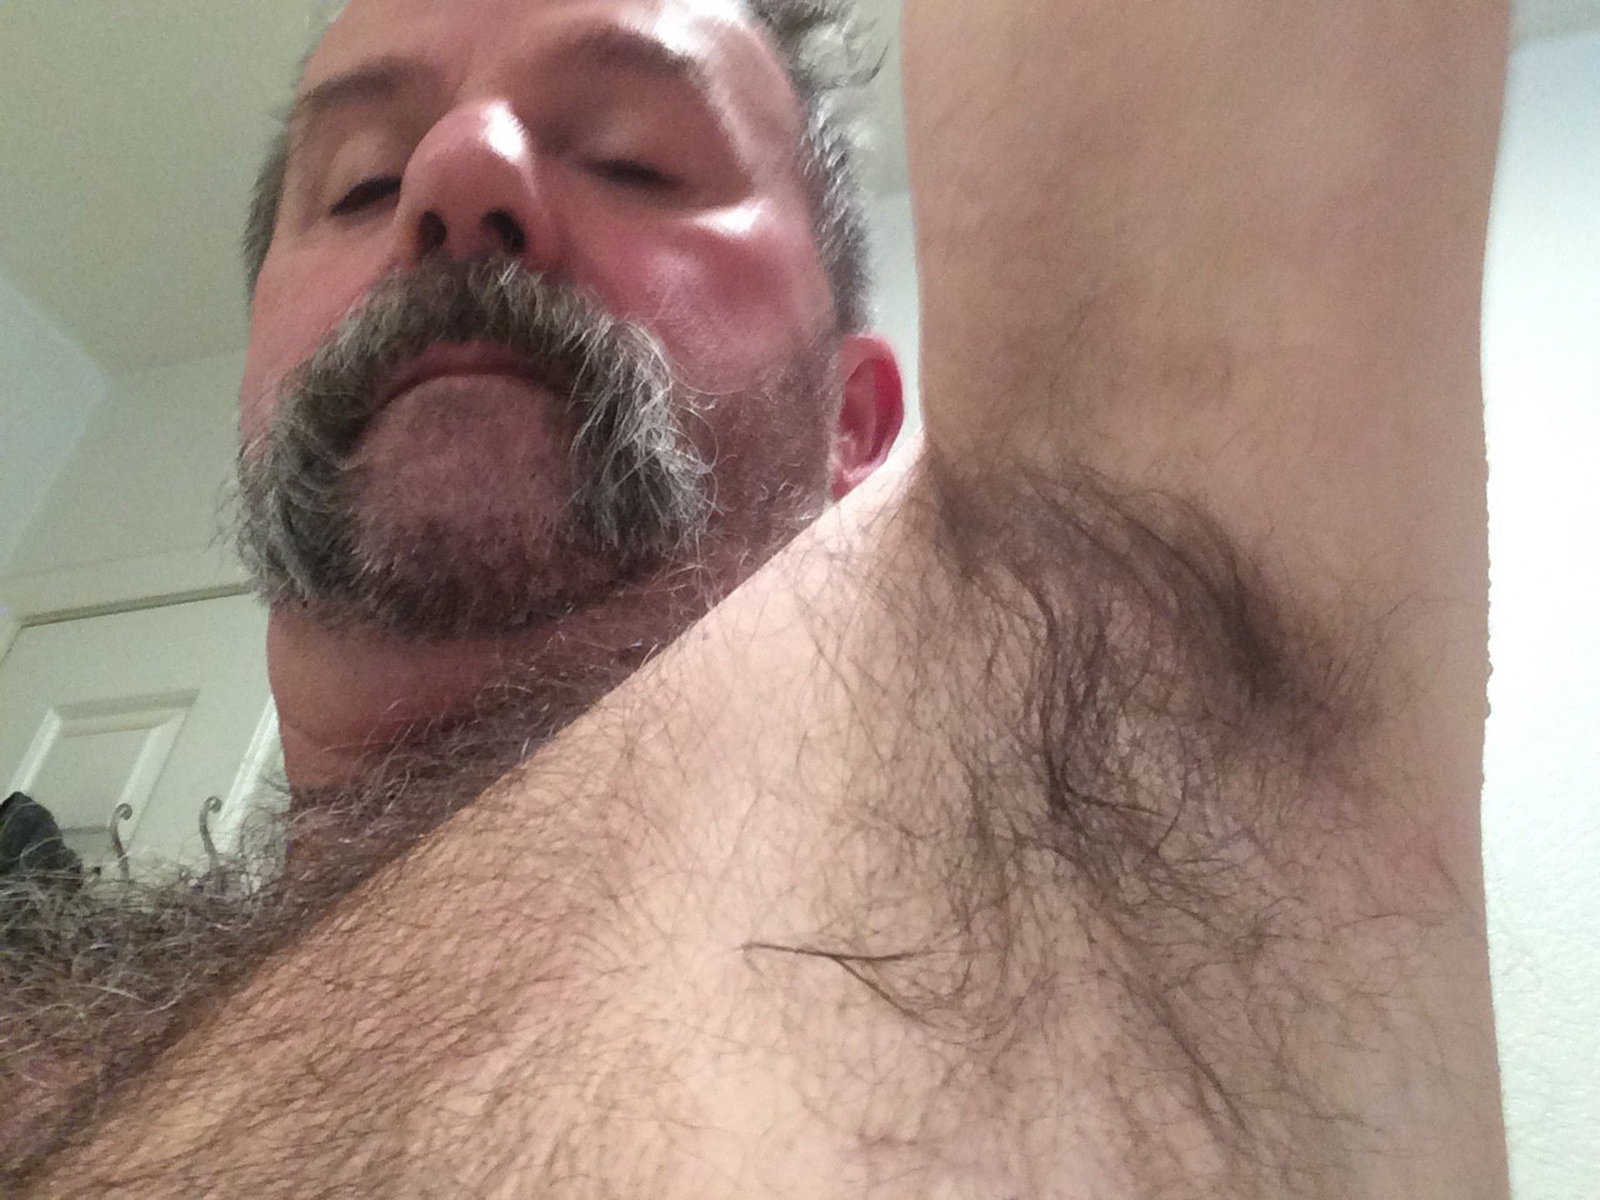 Photo by Smitty with the username @Resol702,  November 4, 2020 at 2:49 PM. The post is about the topic Gay Hairy Armpits